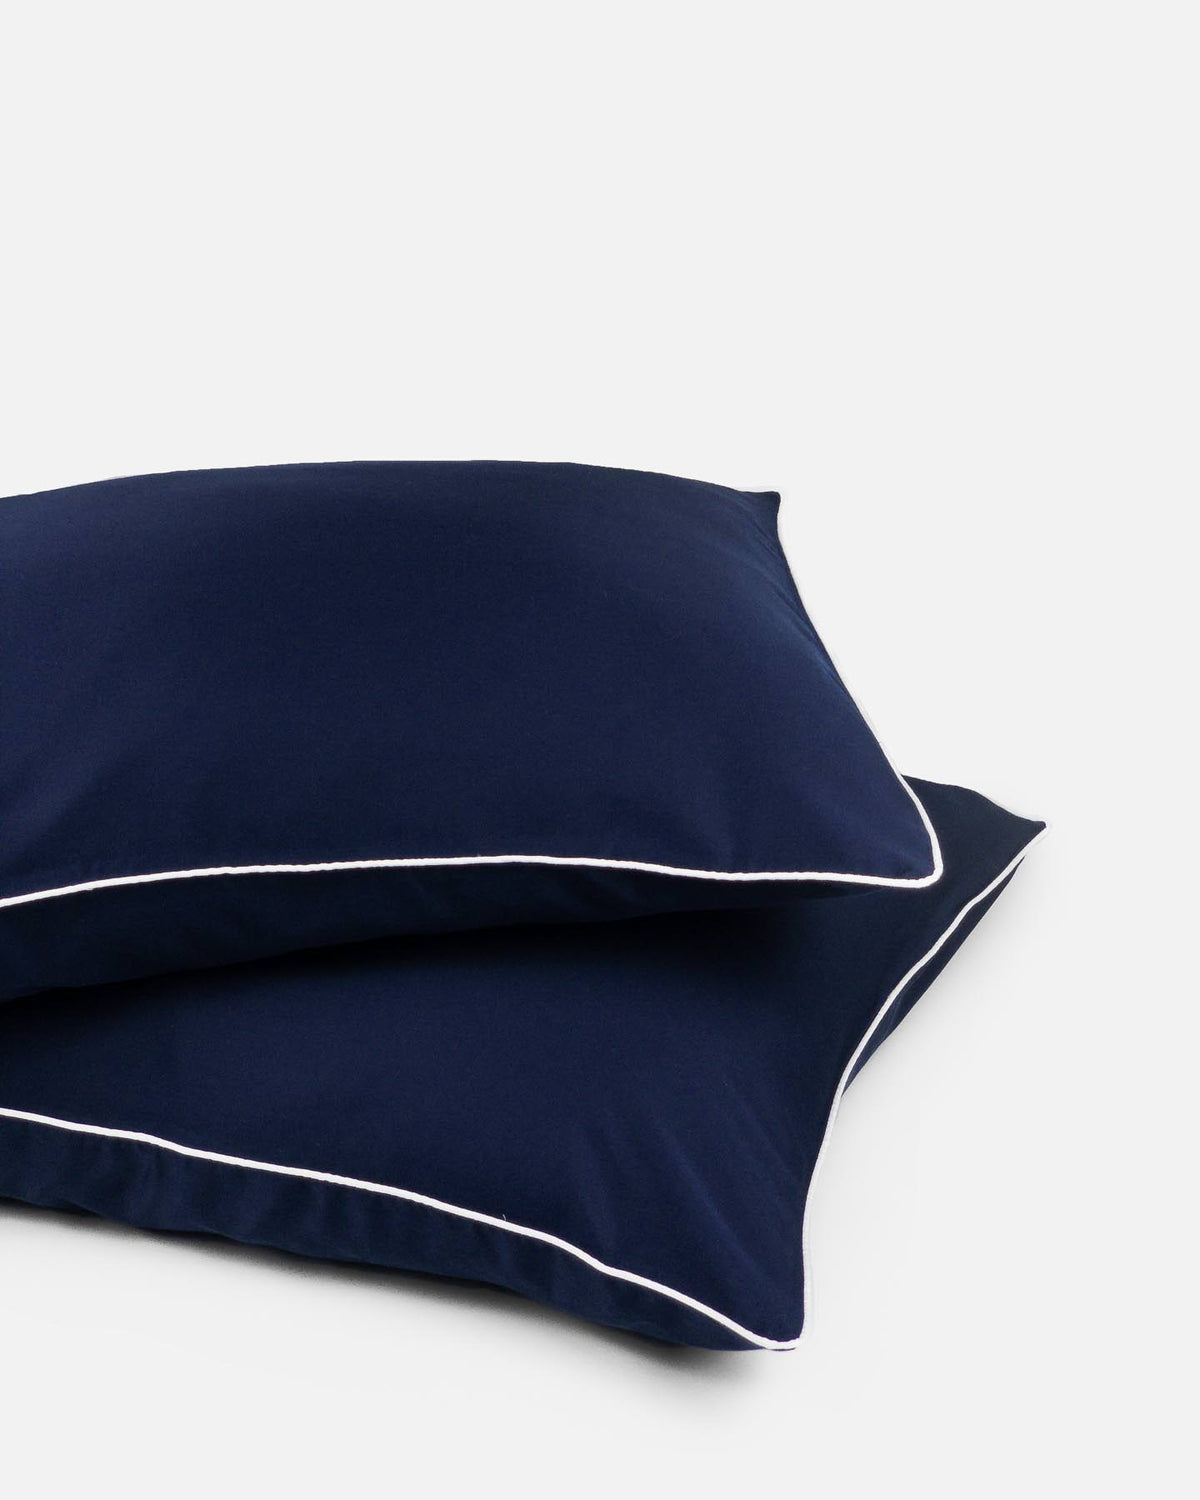 ava and ava ph organic bamboo lyocell pillowcases navy blue with white piping. vegan silk, soft, cool, smooth, breathable.